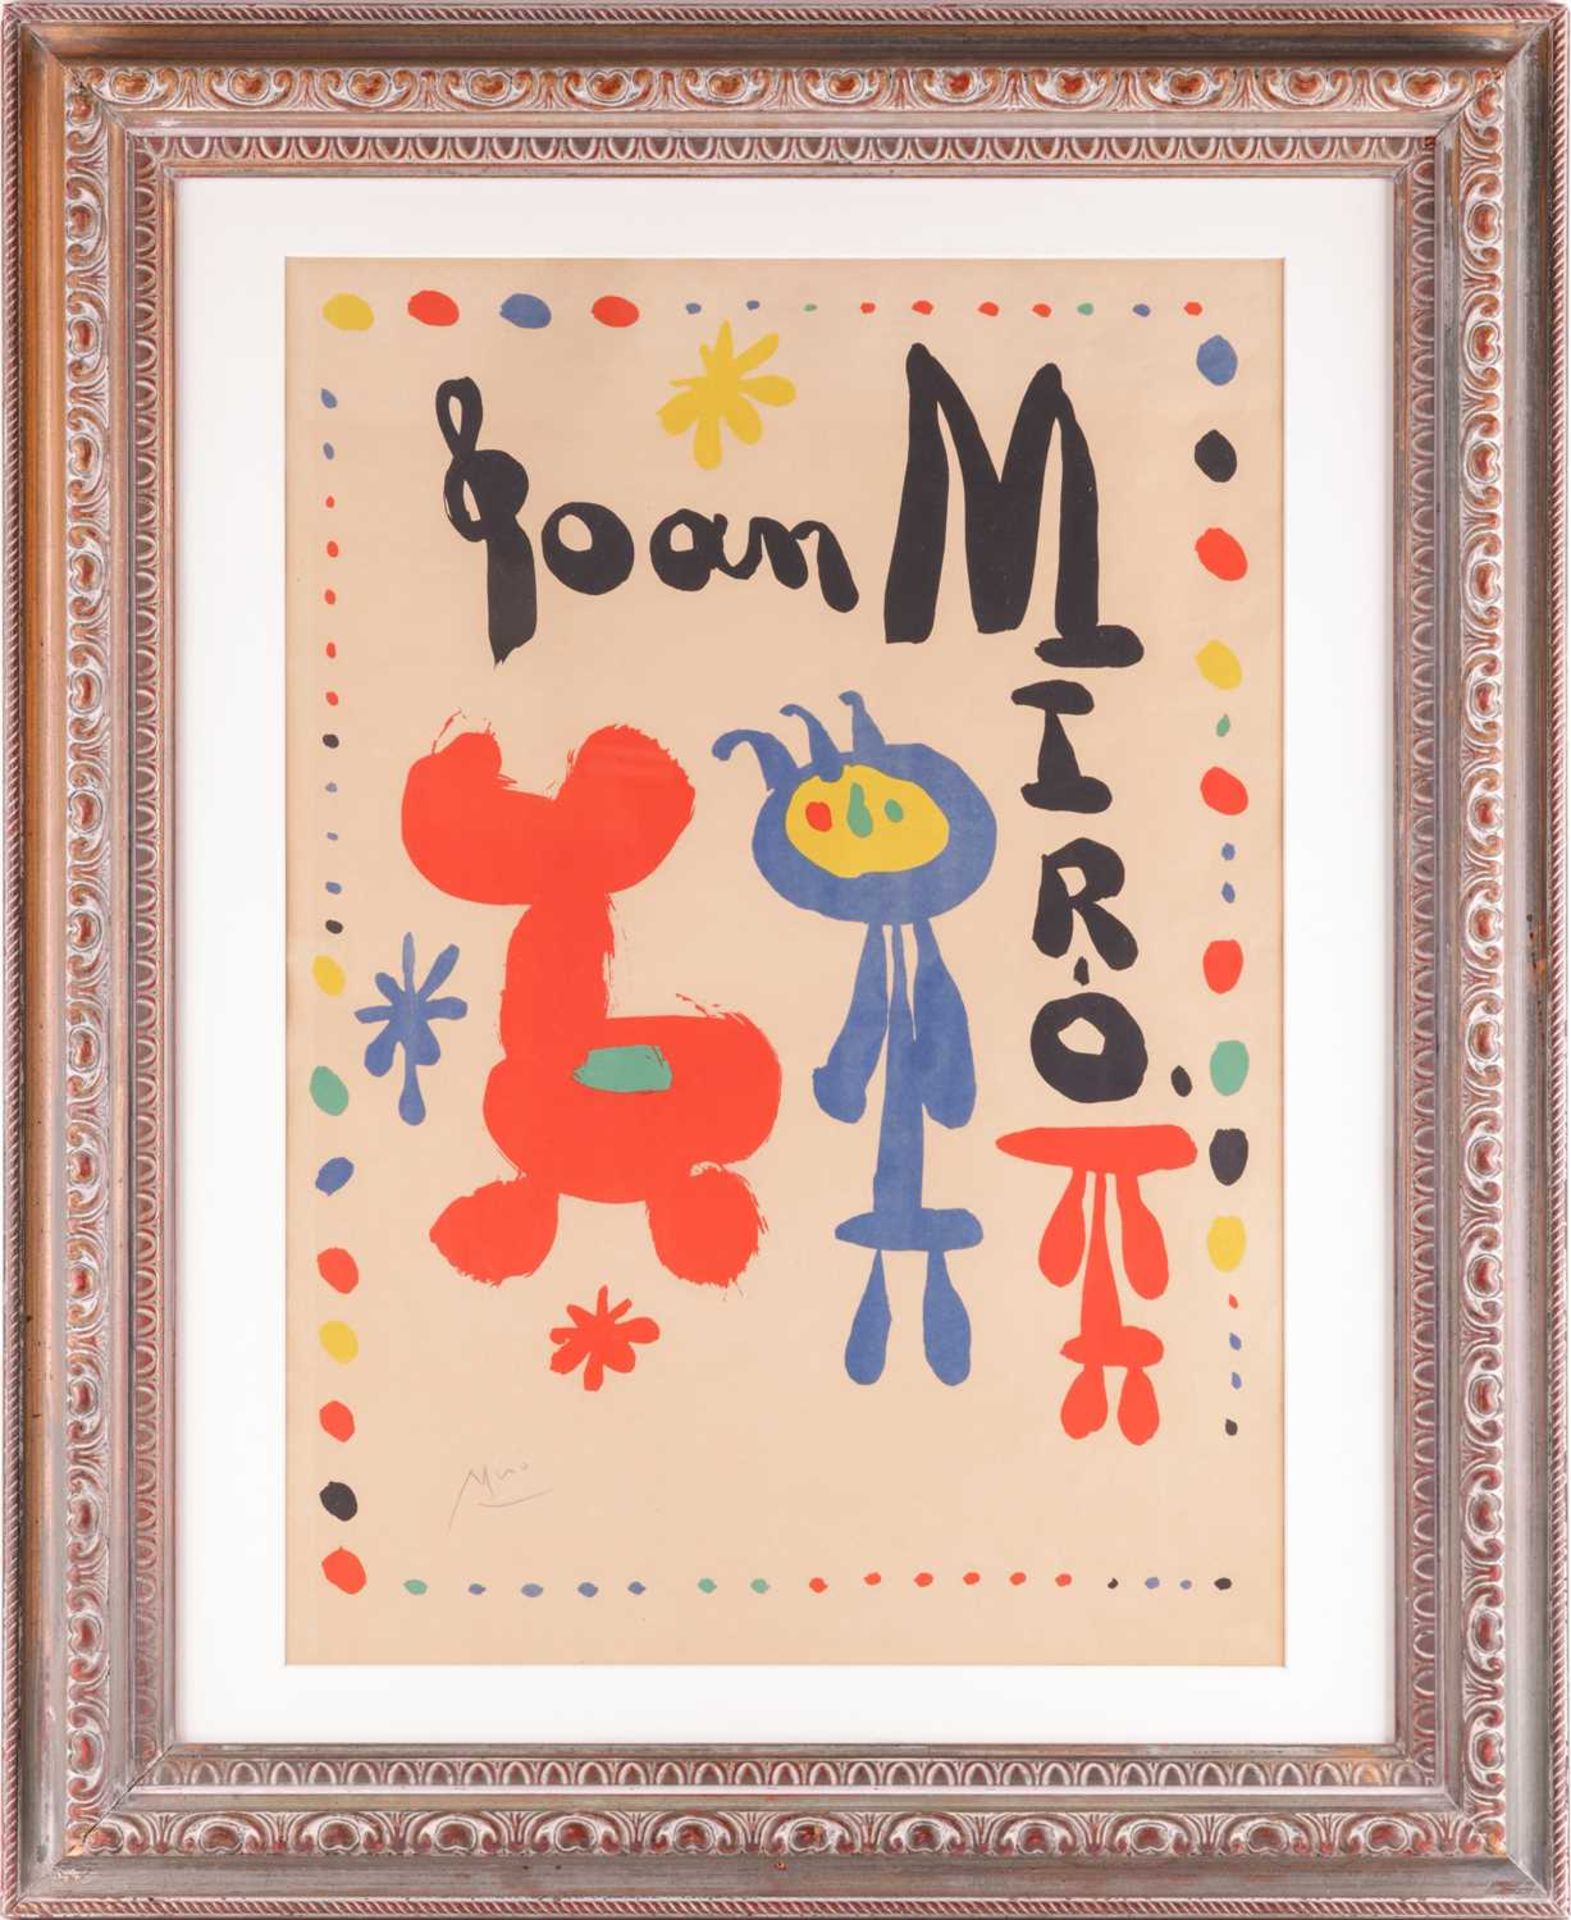 Joan Miro (Spanish, 1893 - 1983), Poster for Exhibition of 1948, signed in pencil (lower left), - Image 2 of 7